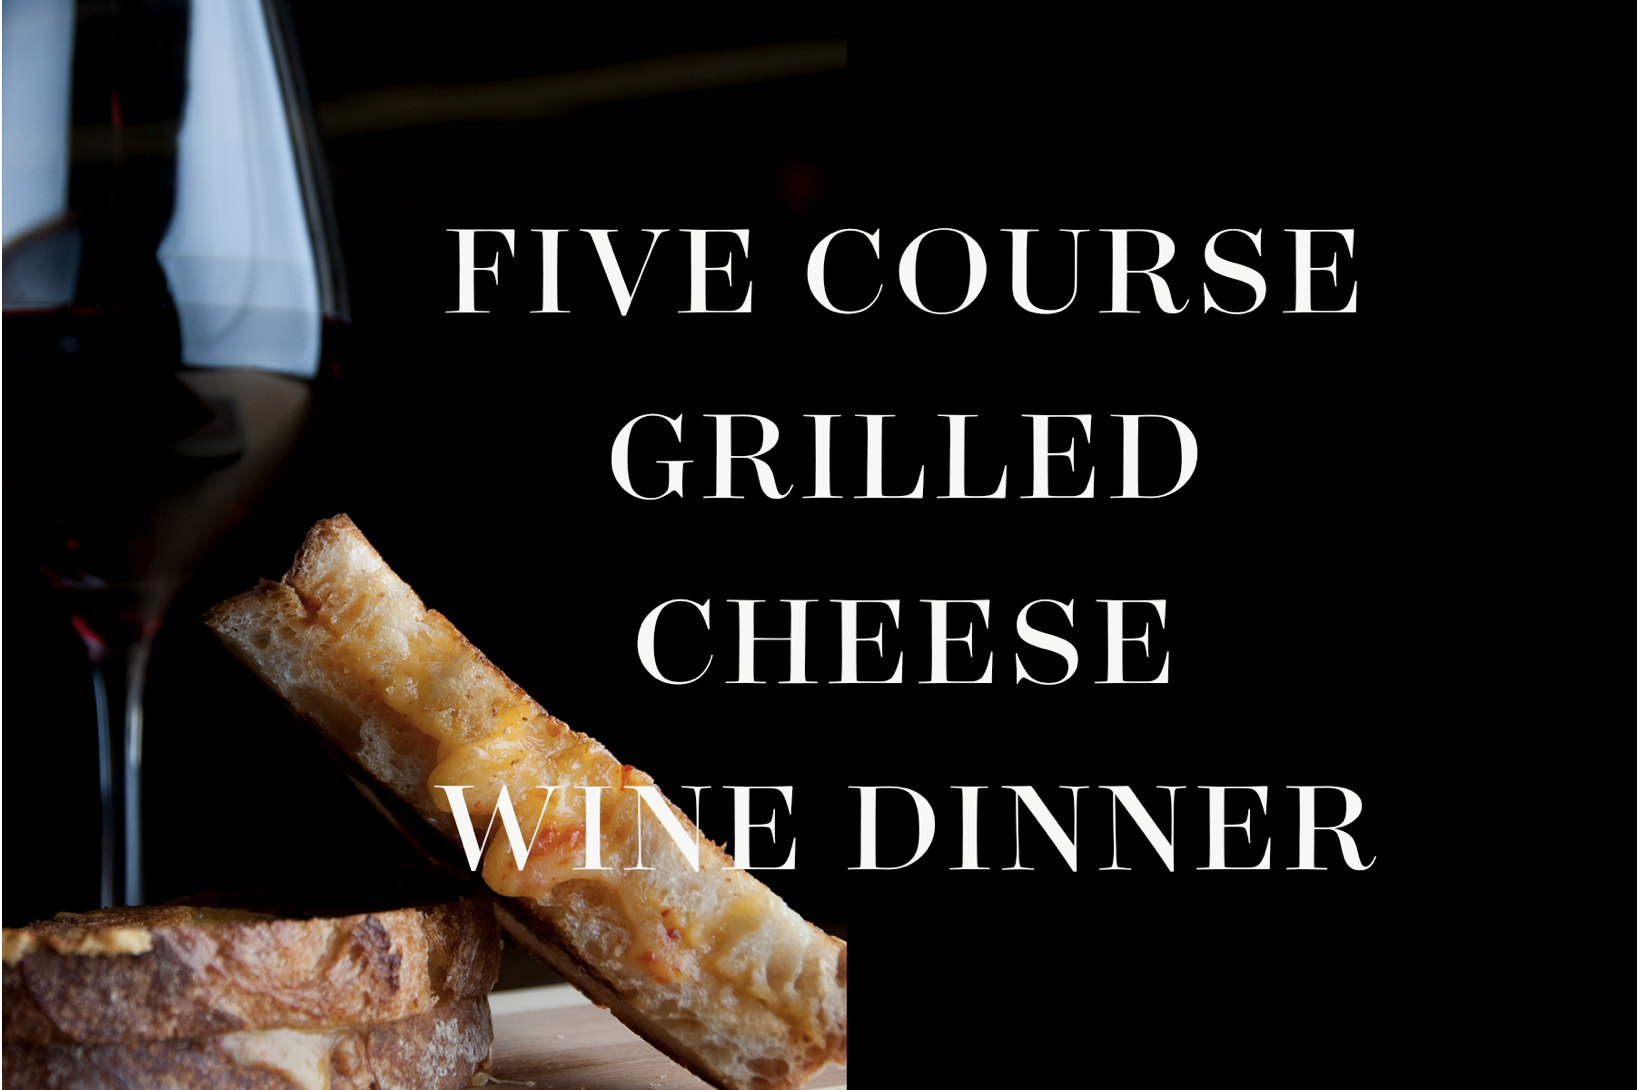 Five Course Grilled Cheese & Wine Dinner